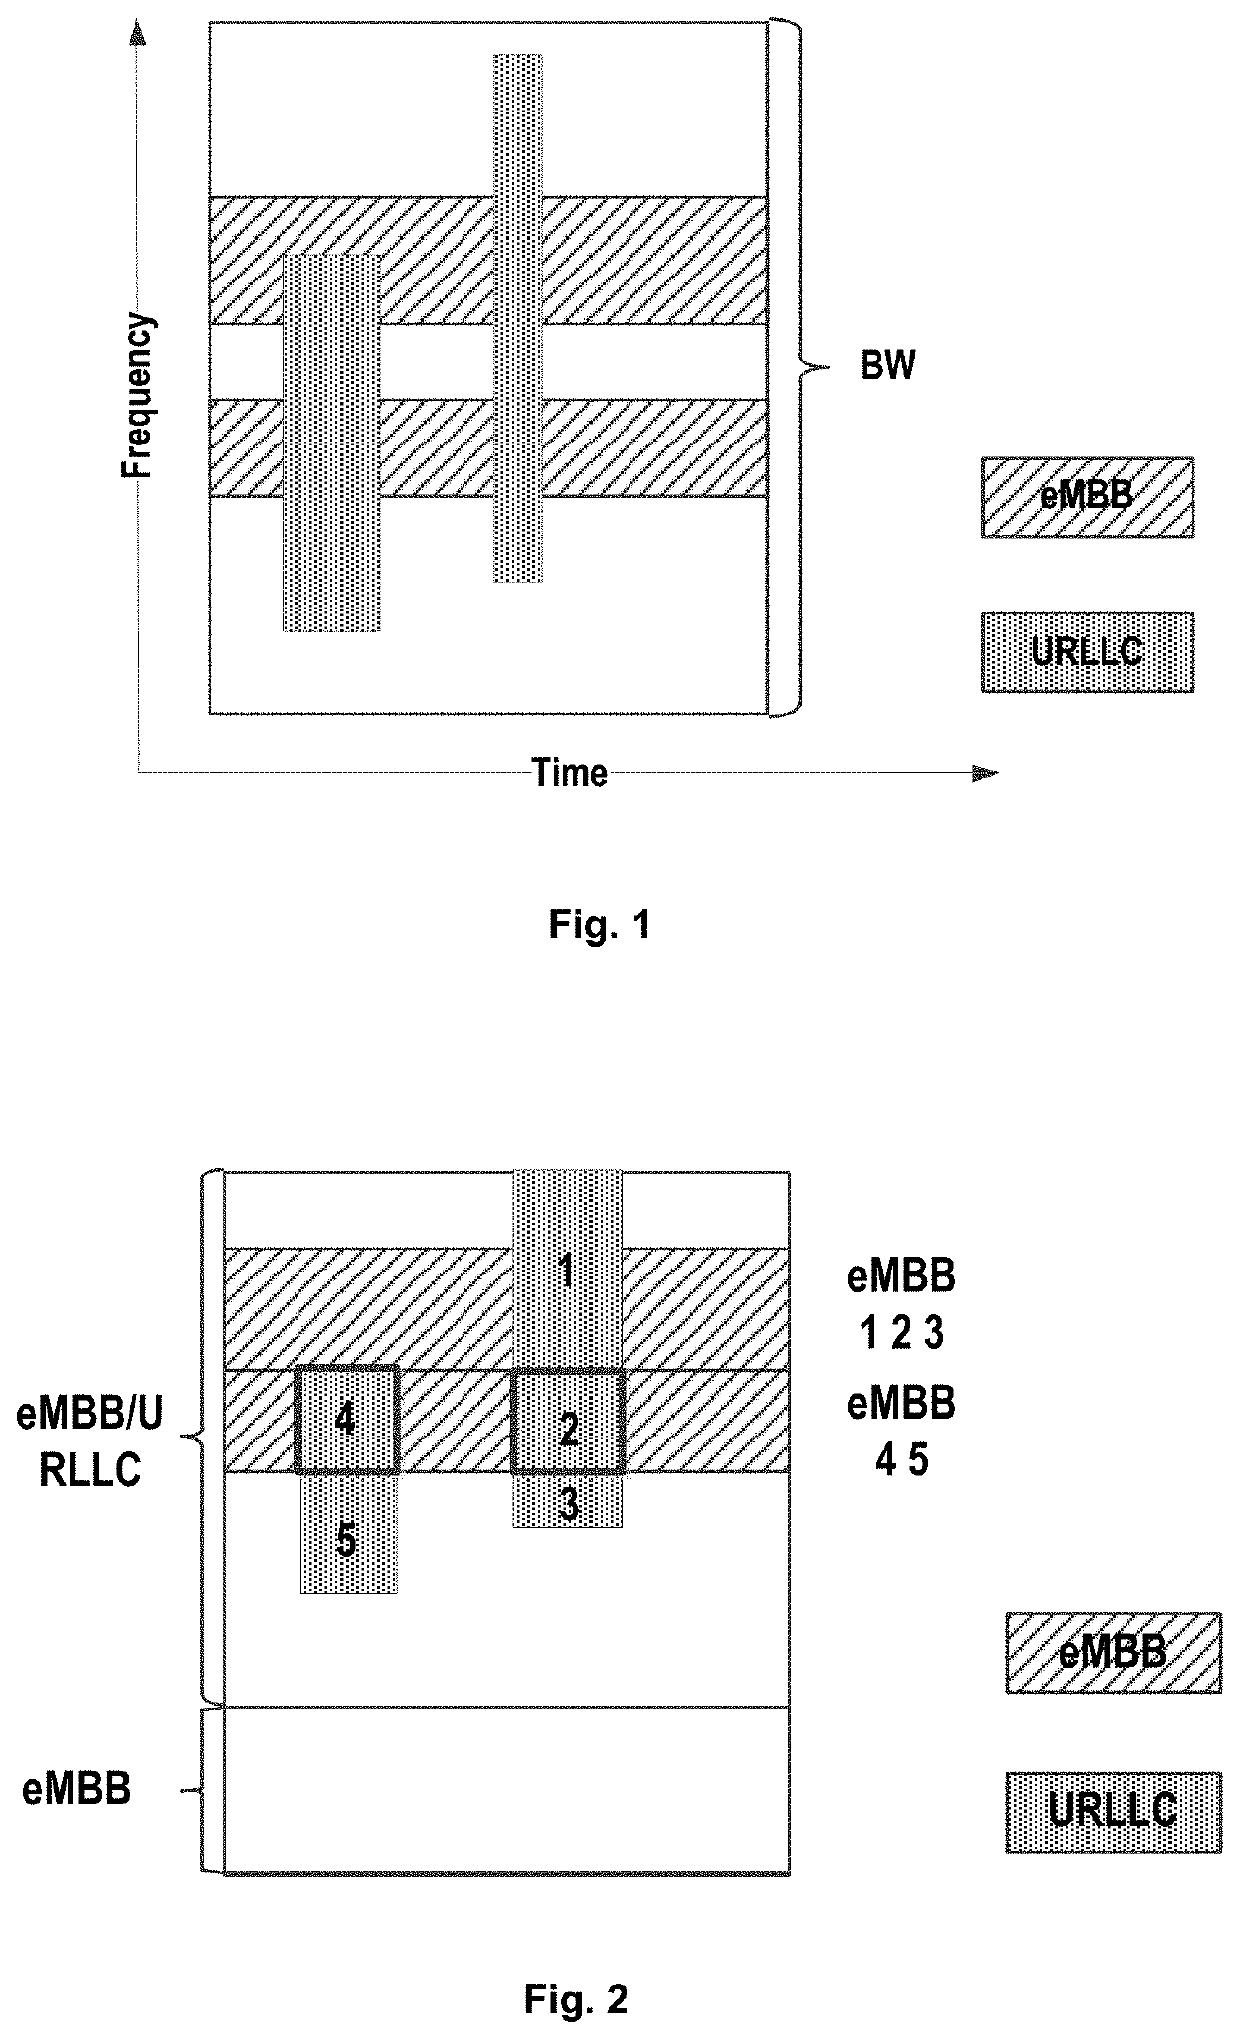 Methods and apparatuses for transmitting and receiving a preemption indication